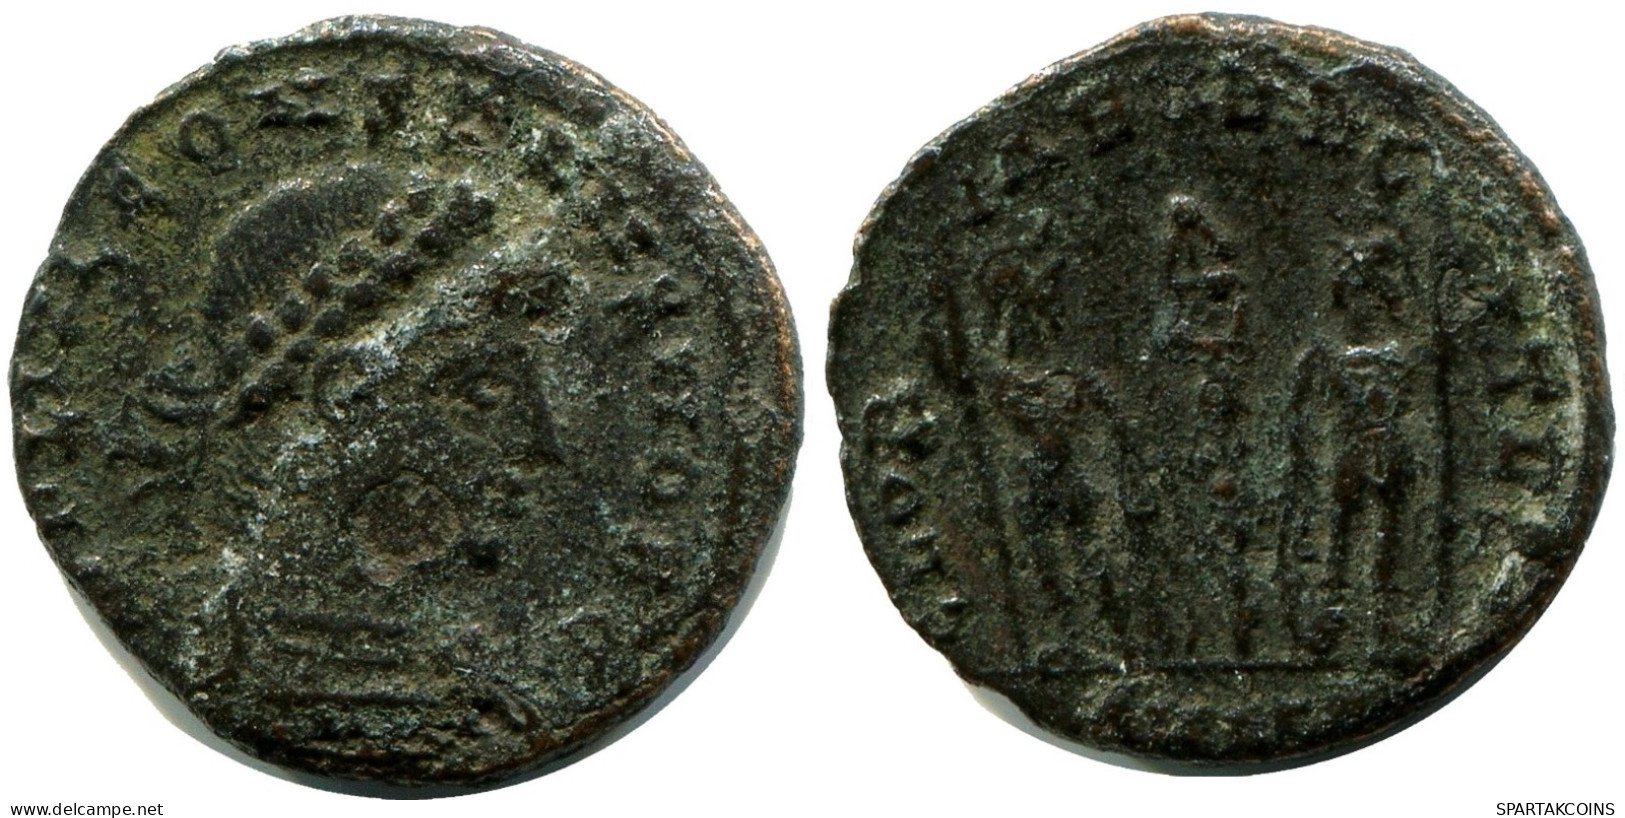 CONSTANS MINTED IN ALEKSANDRIA FROM THE ROYAL ONTARIO MUSEUM #ANC11401.14.F.A - El Imperio Christiano (307 / 363)